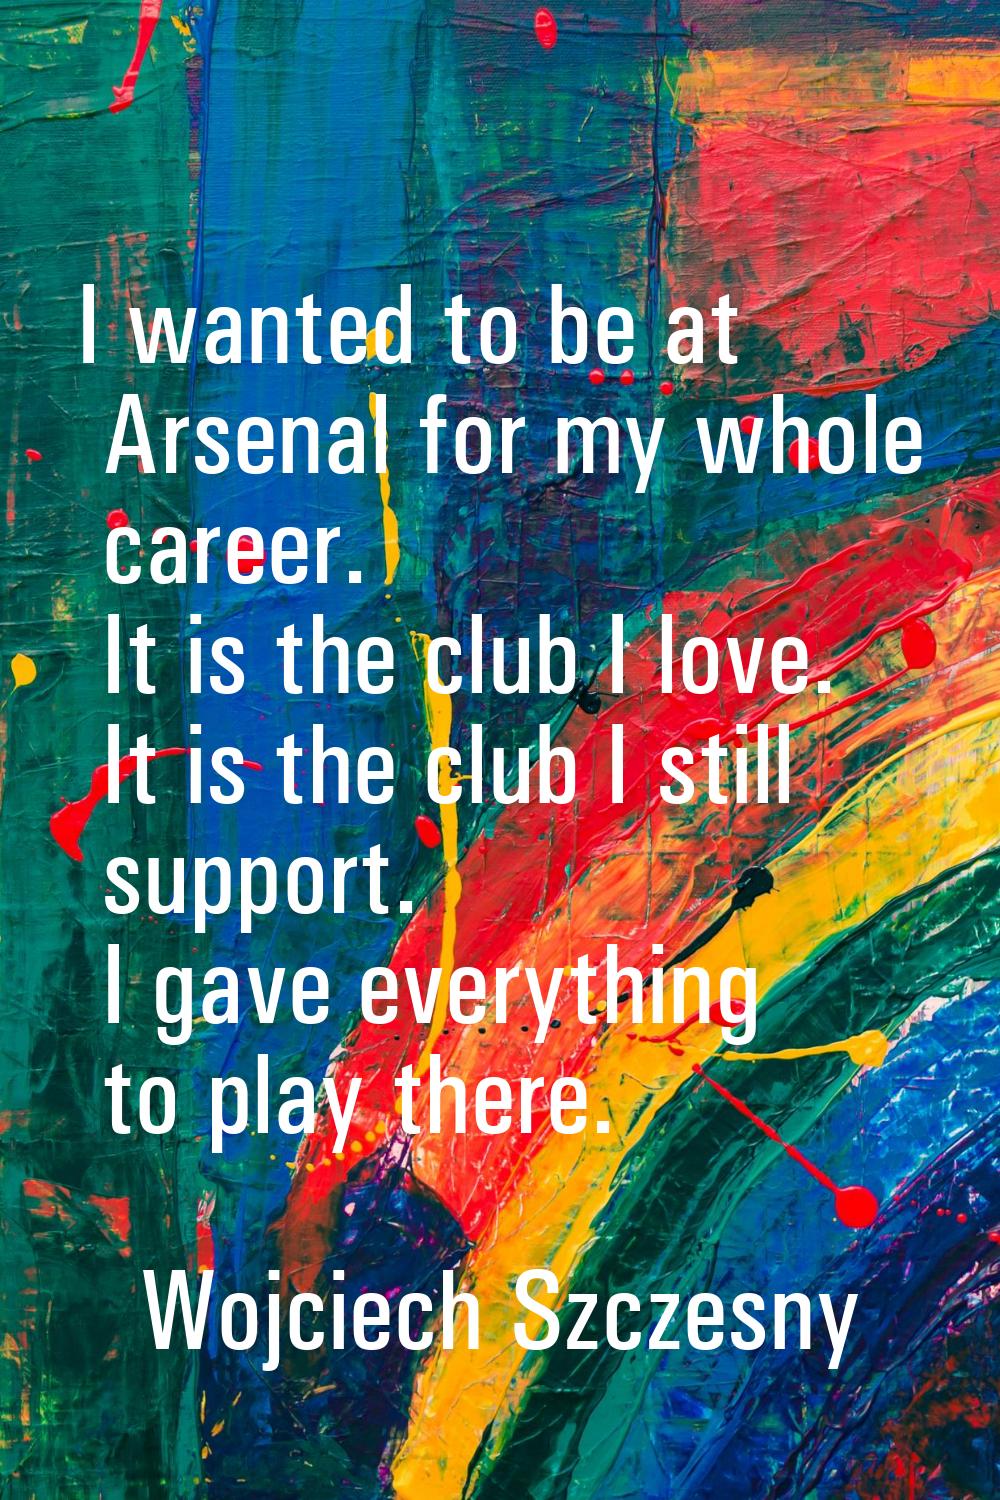 I wanted to be at Arsenal for my whole career. It is the club I love. It is the club I still suppor